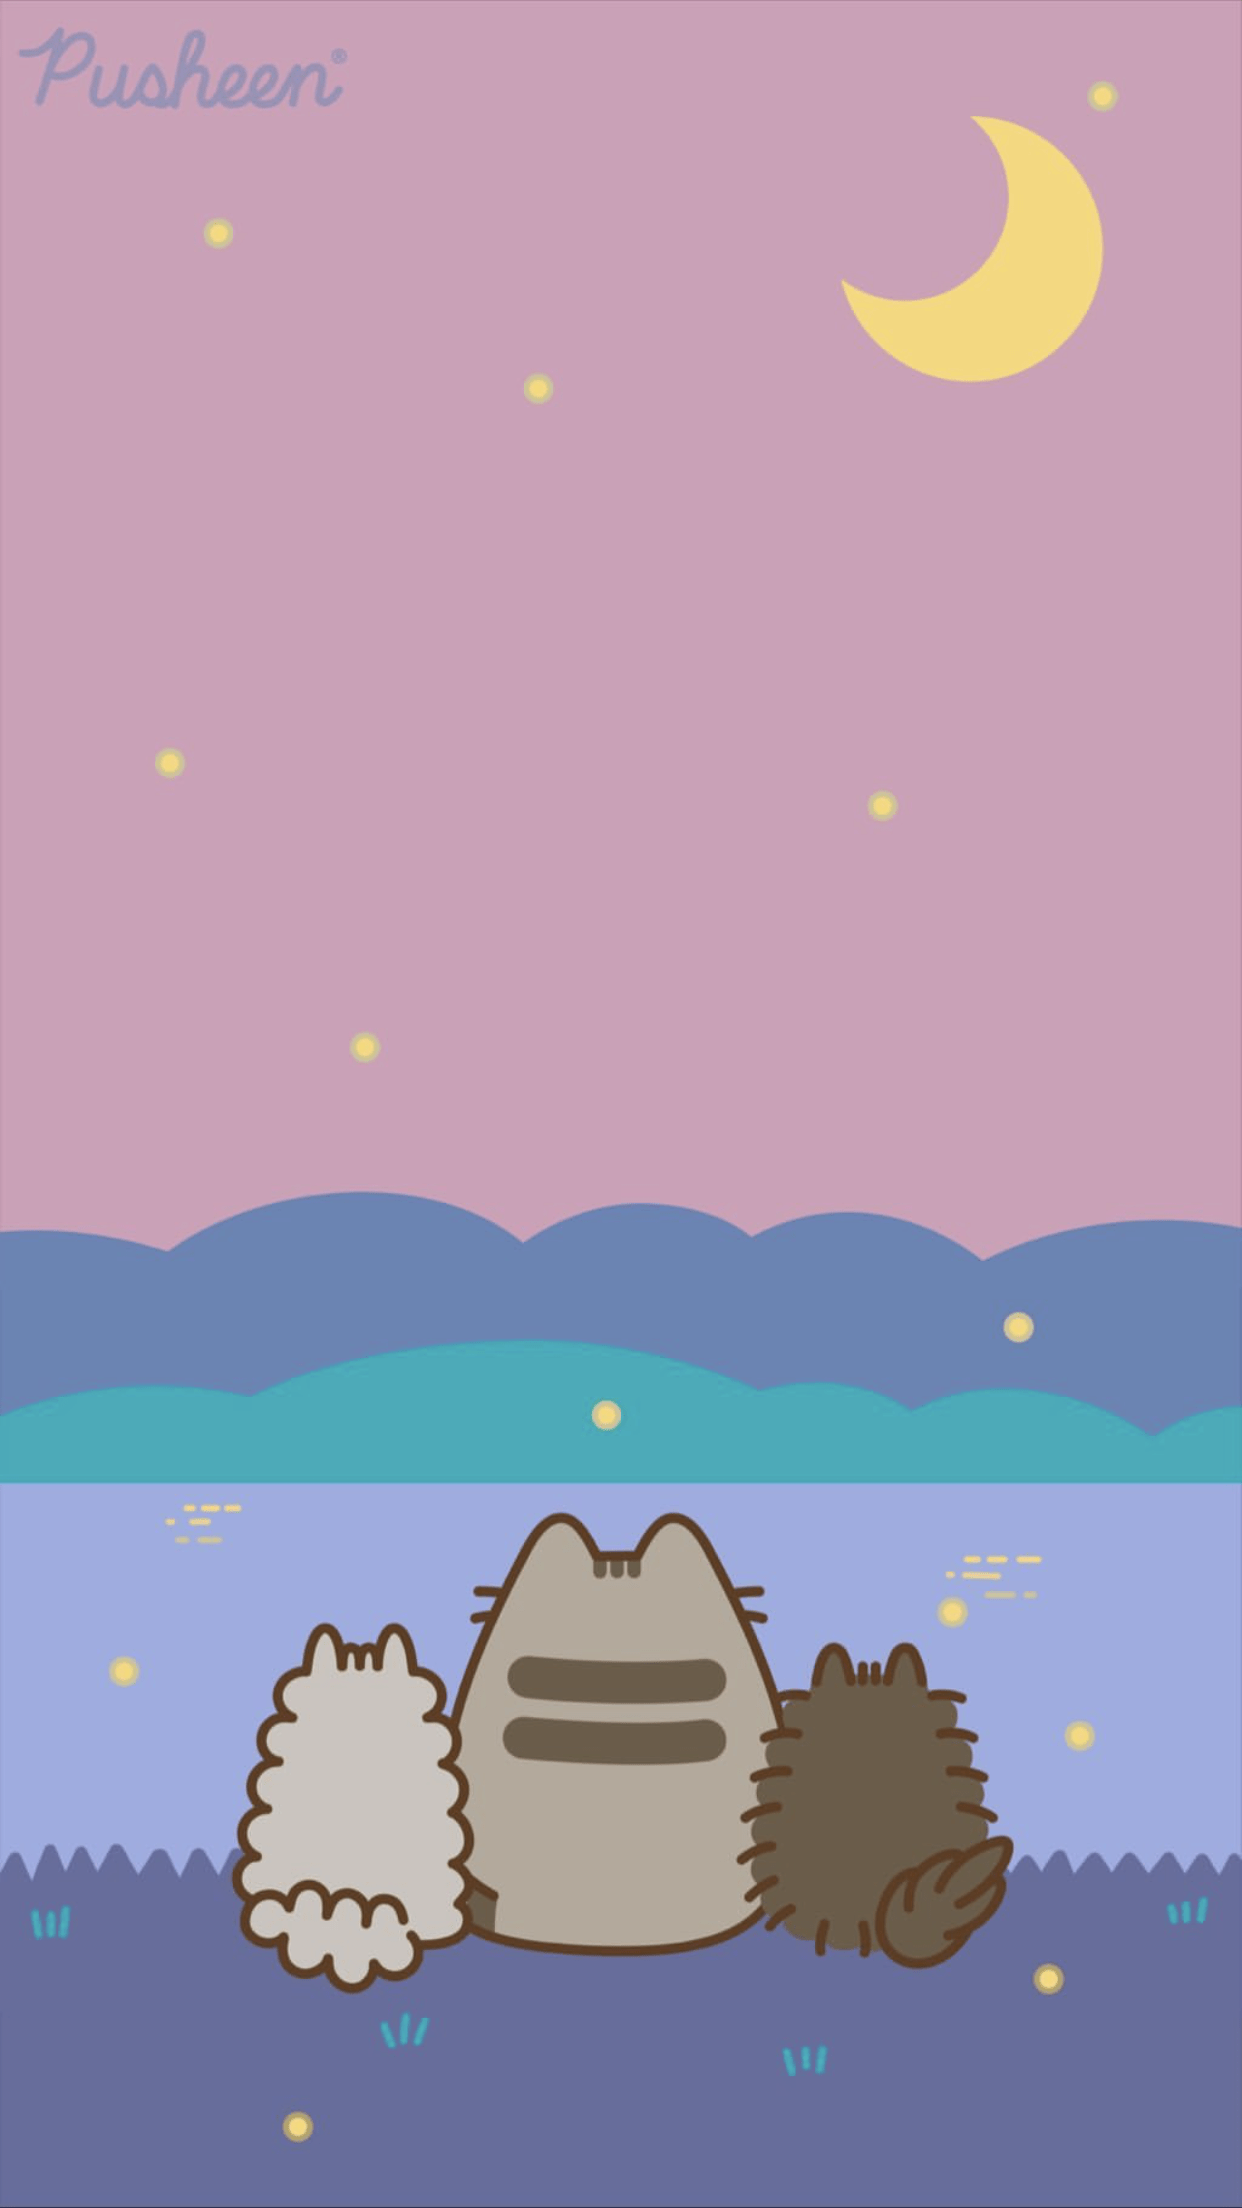 A cat sitting on the ground looking at something - Pusheen